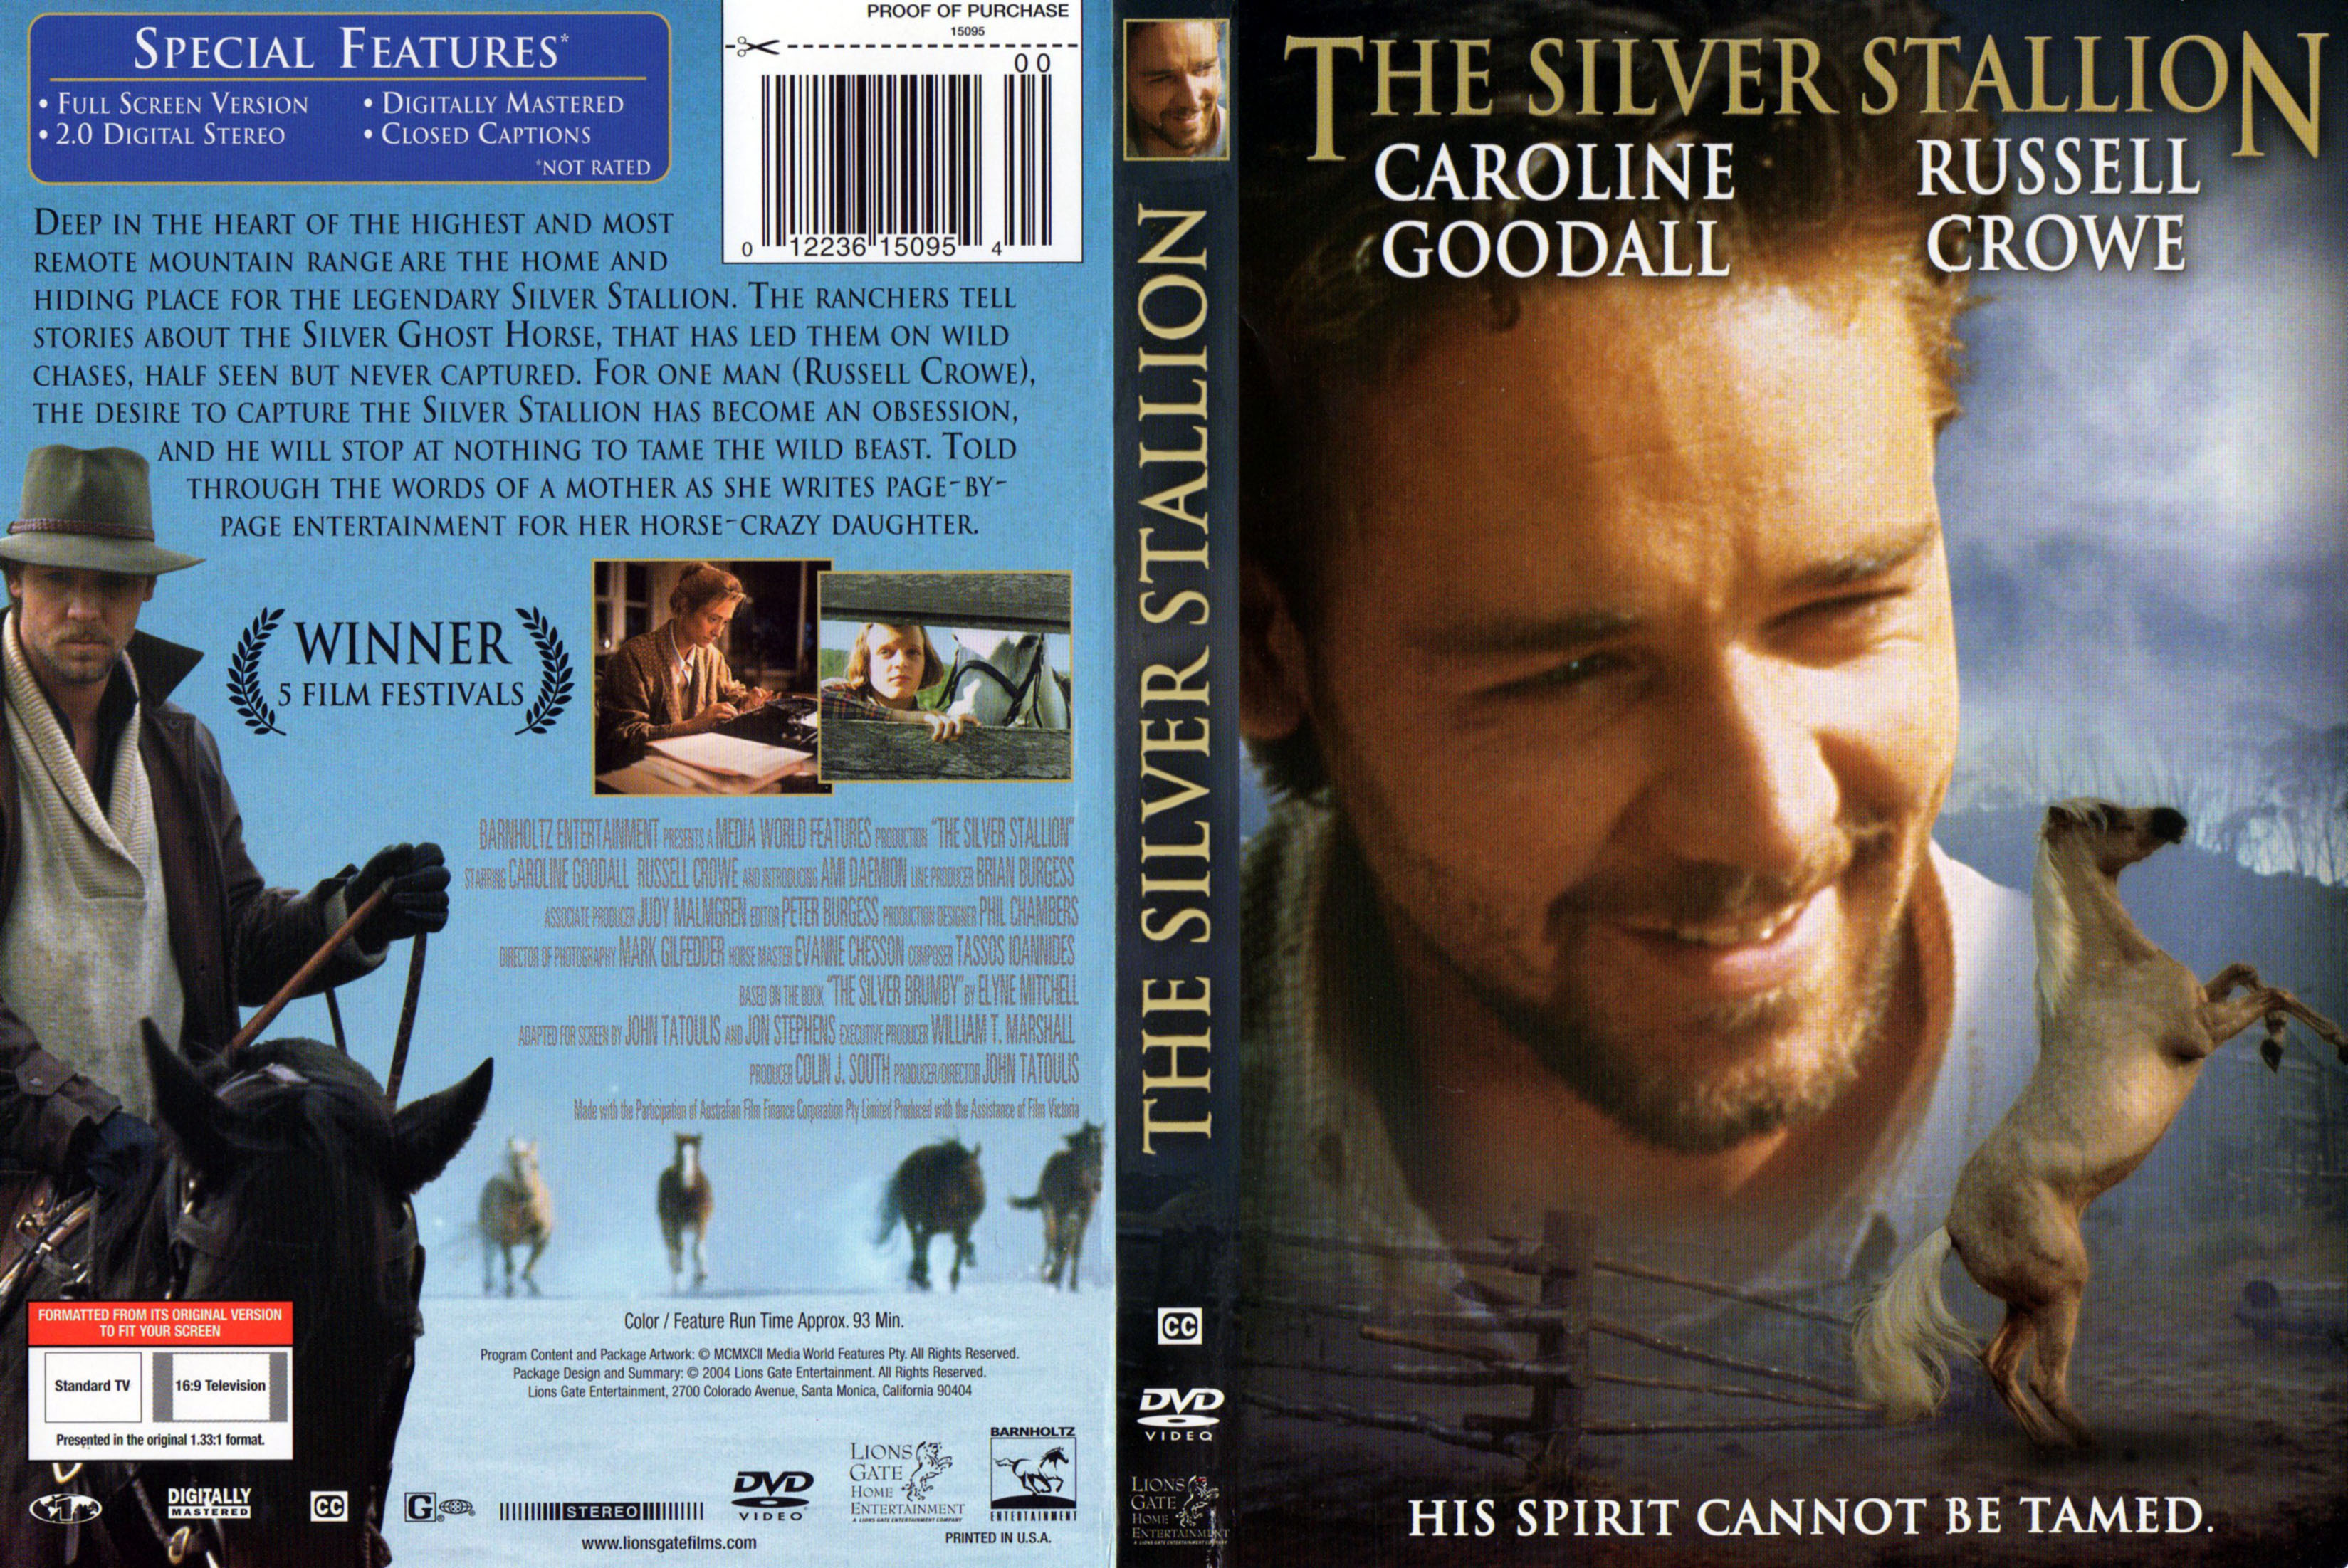 Jaquette DVD The silver stallion Zone 1